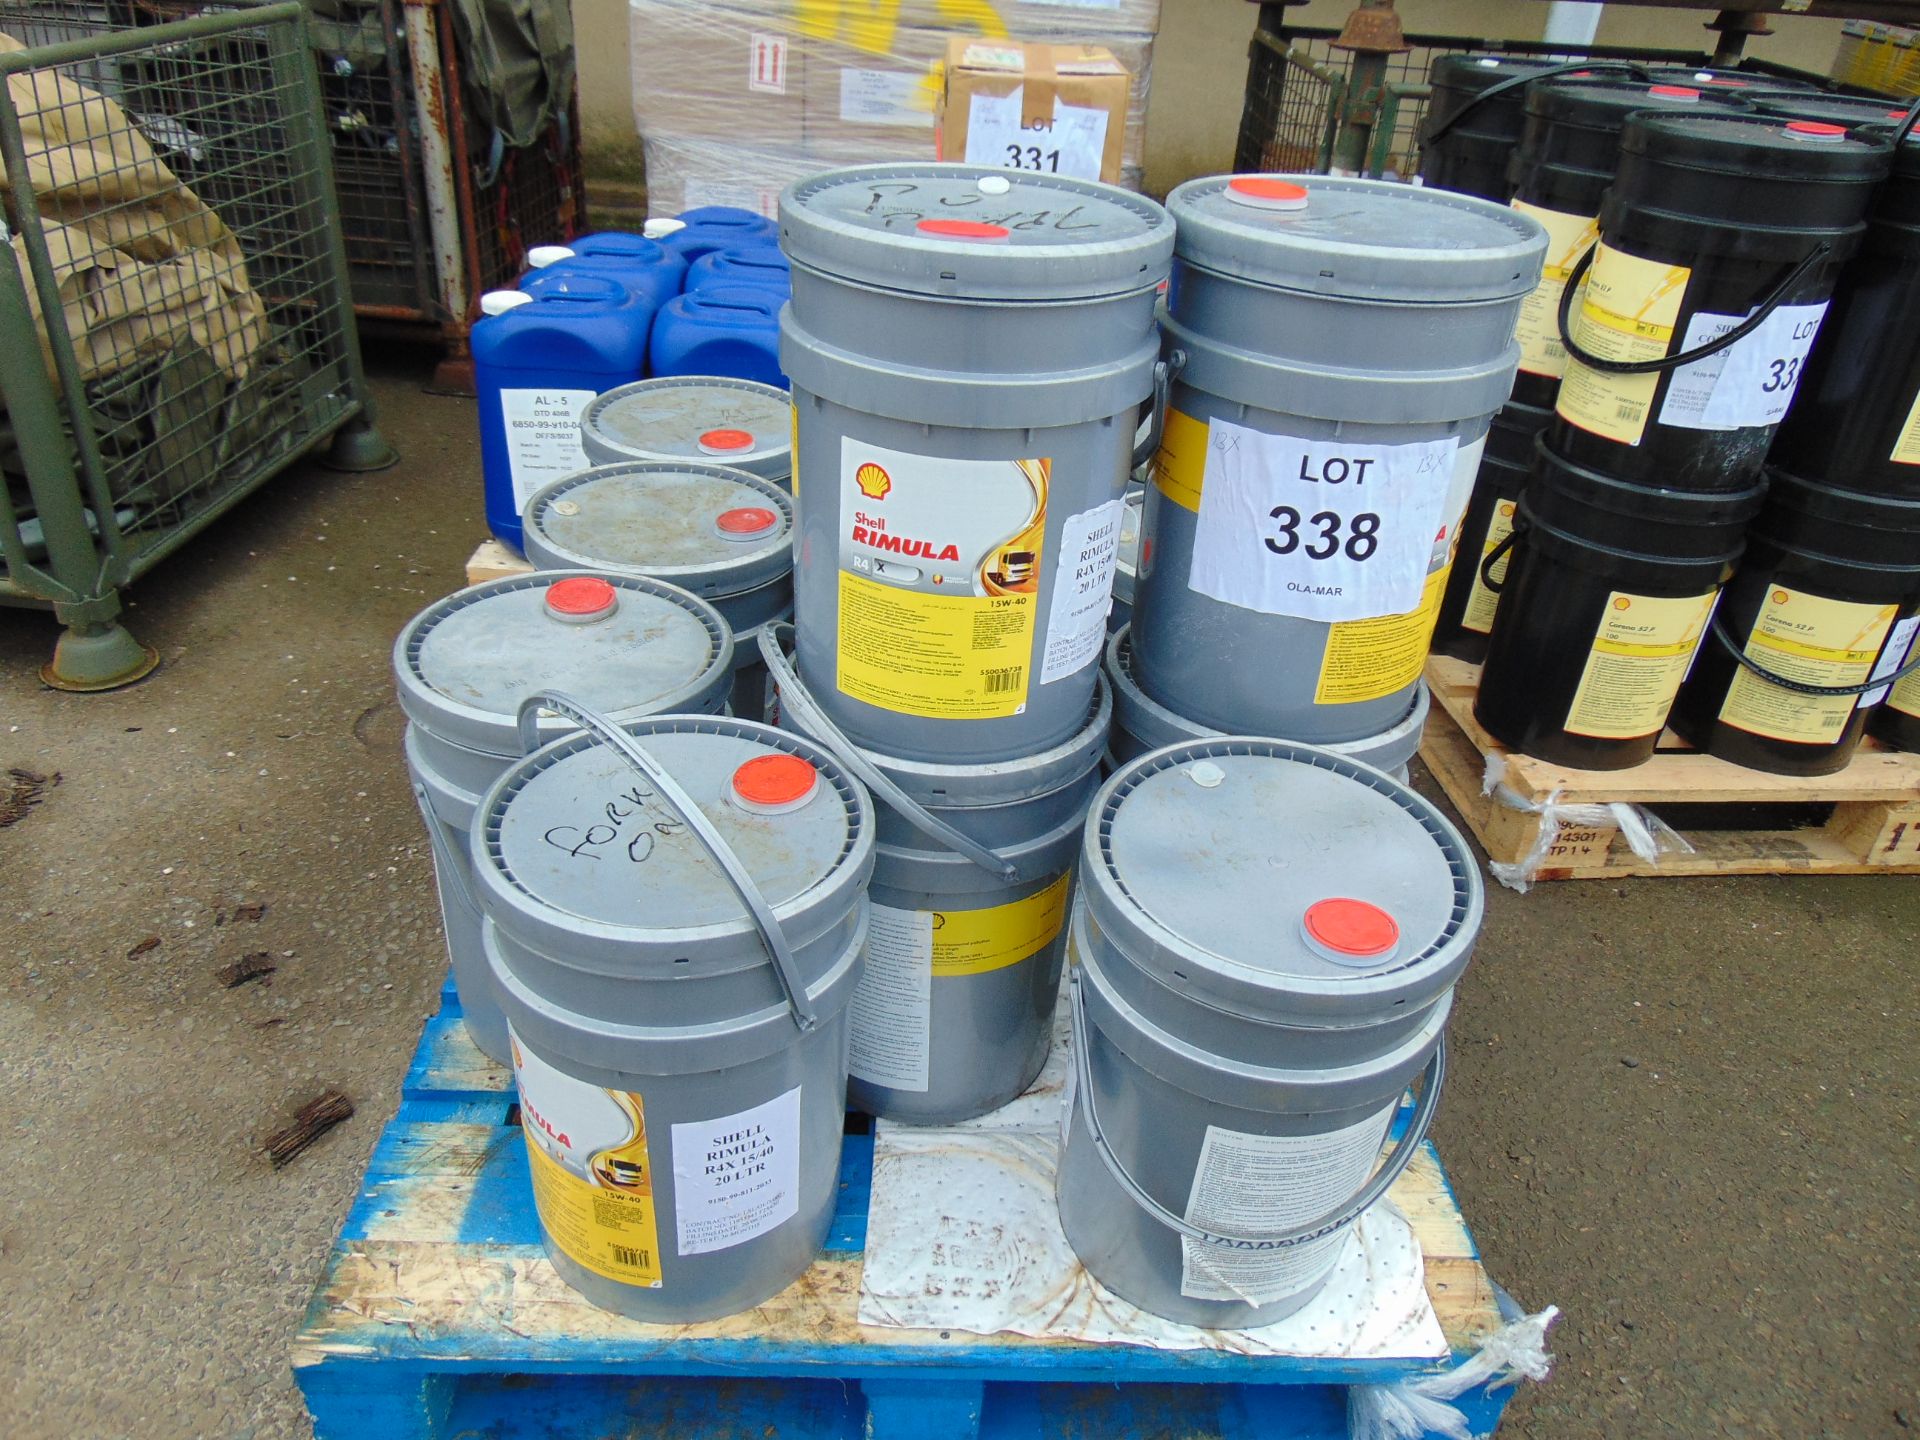 13 x 20 Litre Drums Shell Rimula R4 X, Shell Rimula R4X 15w40 Synthetic Motor OIL